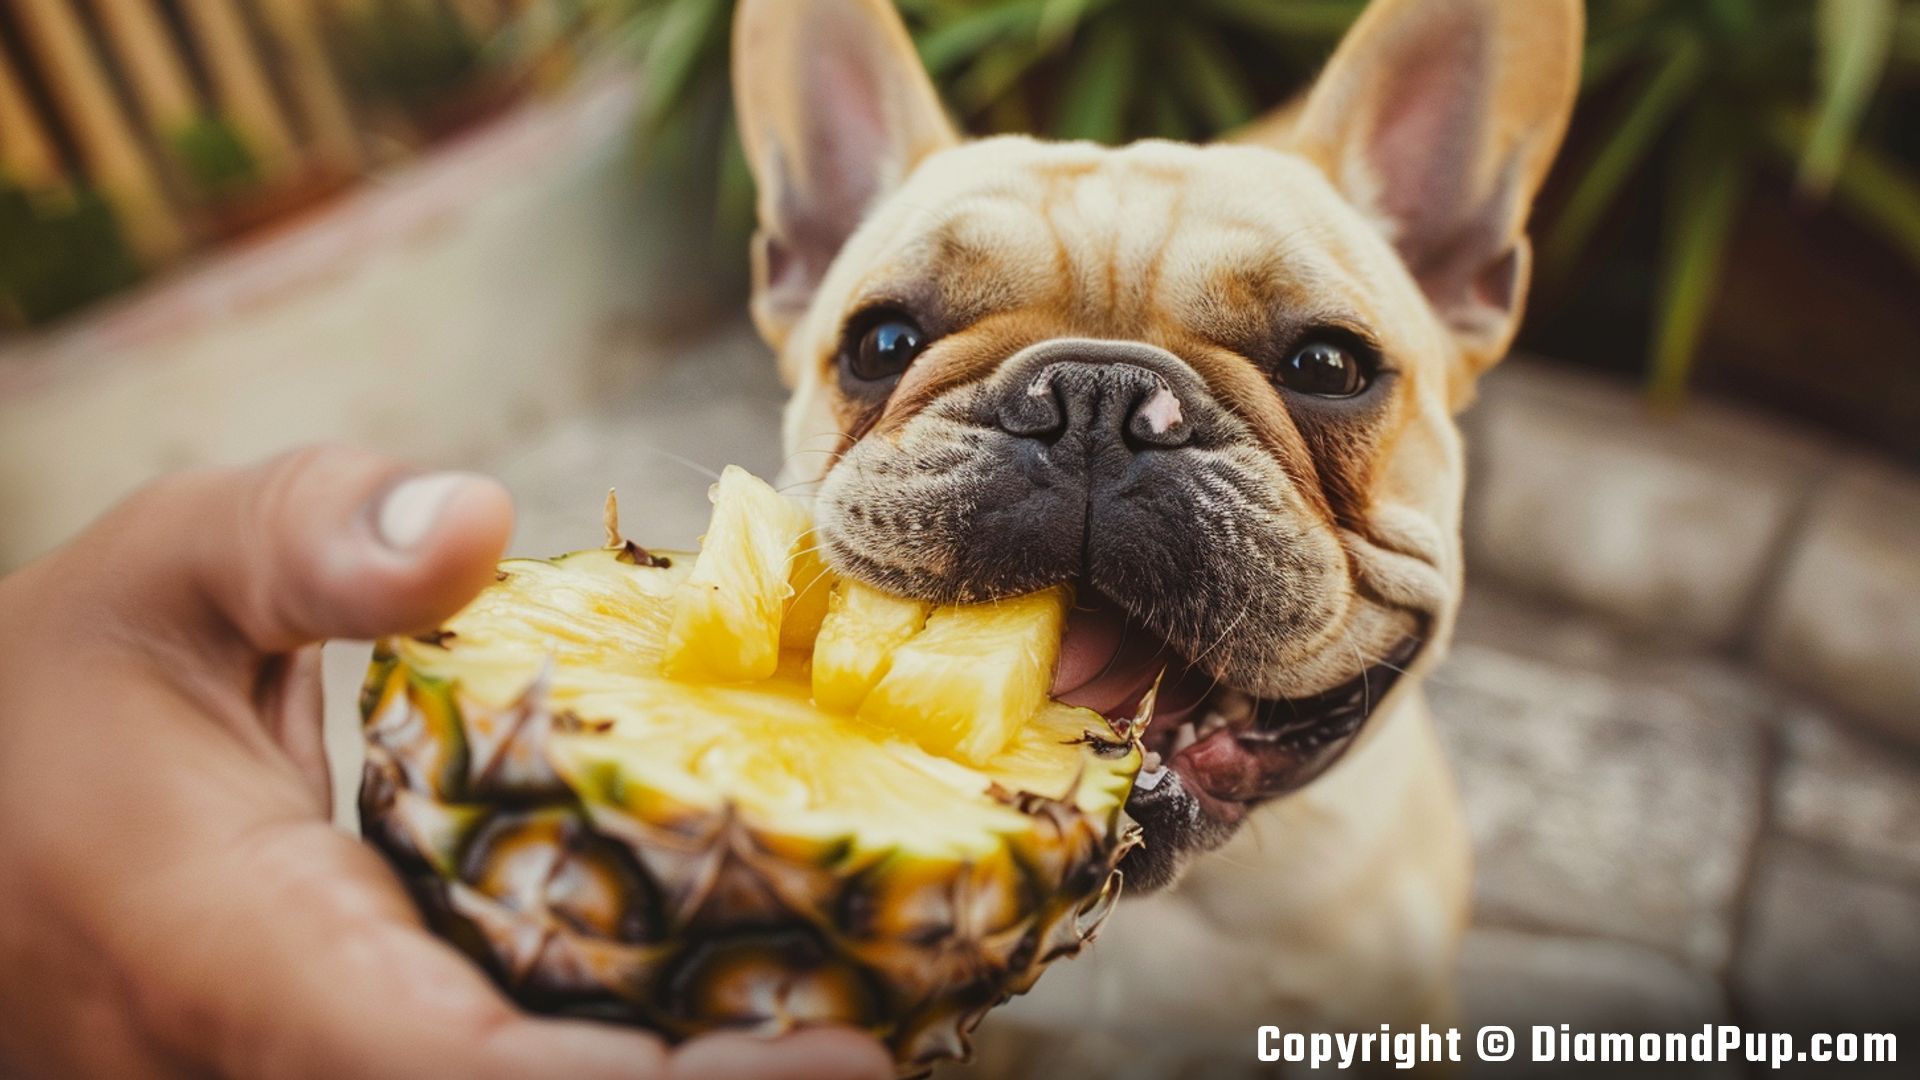 Photograph of a Playful French Bulldog Snacking on Pineapple